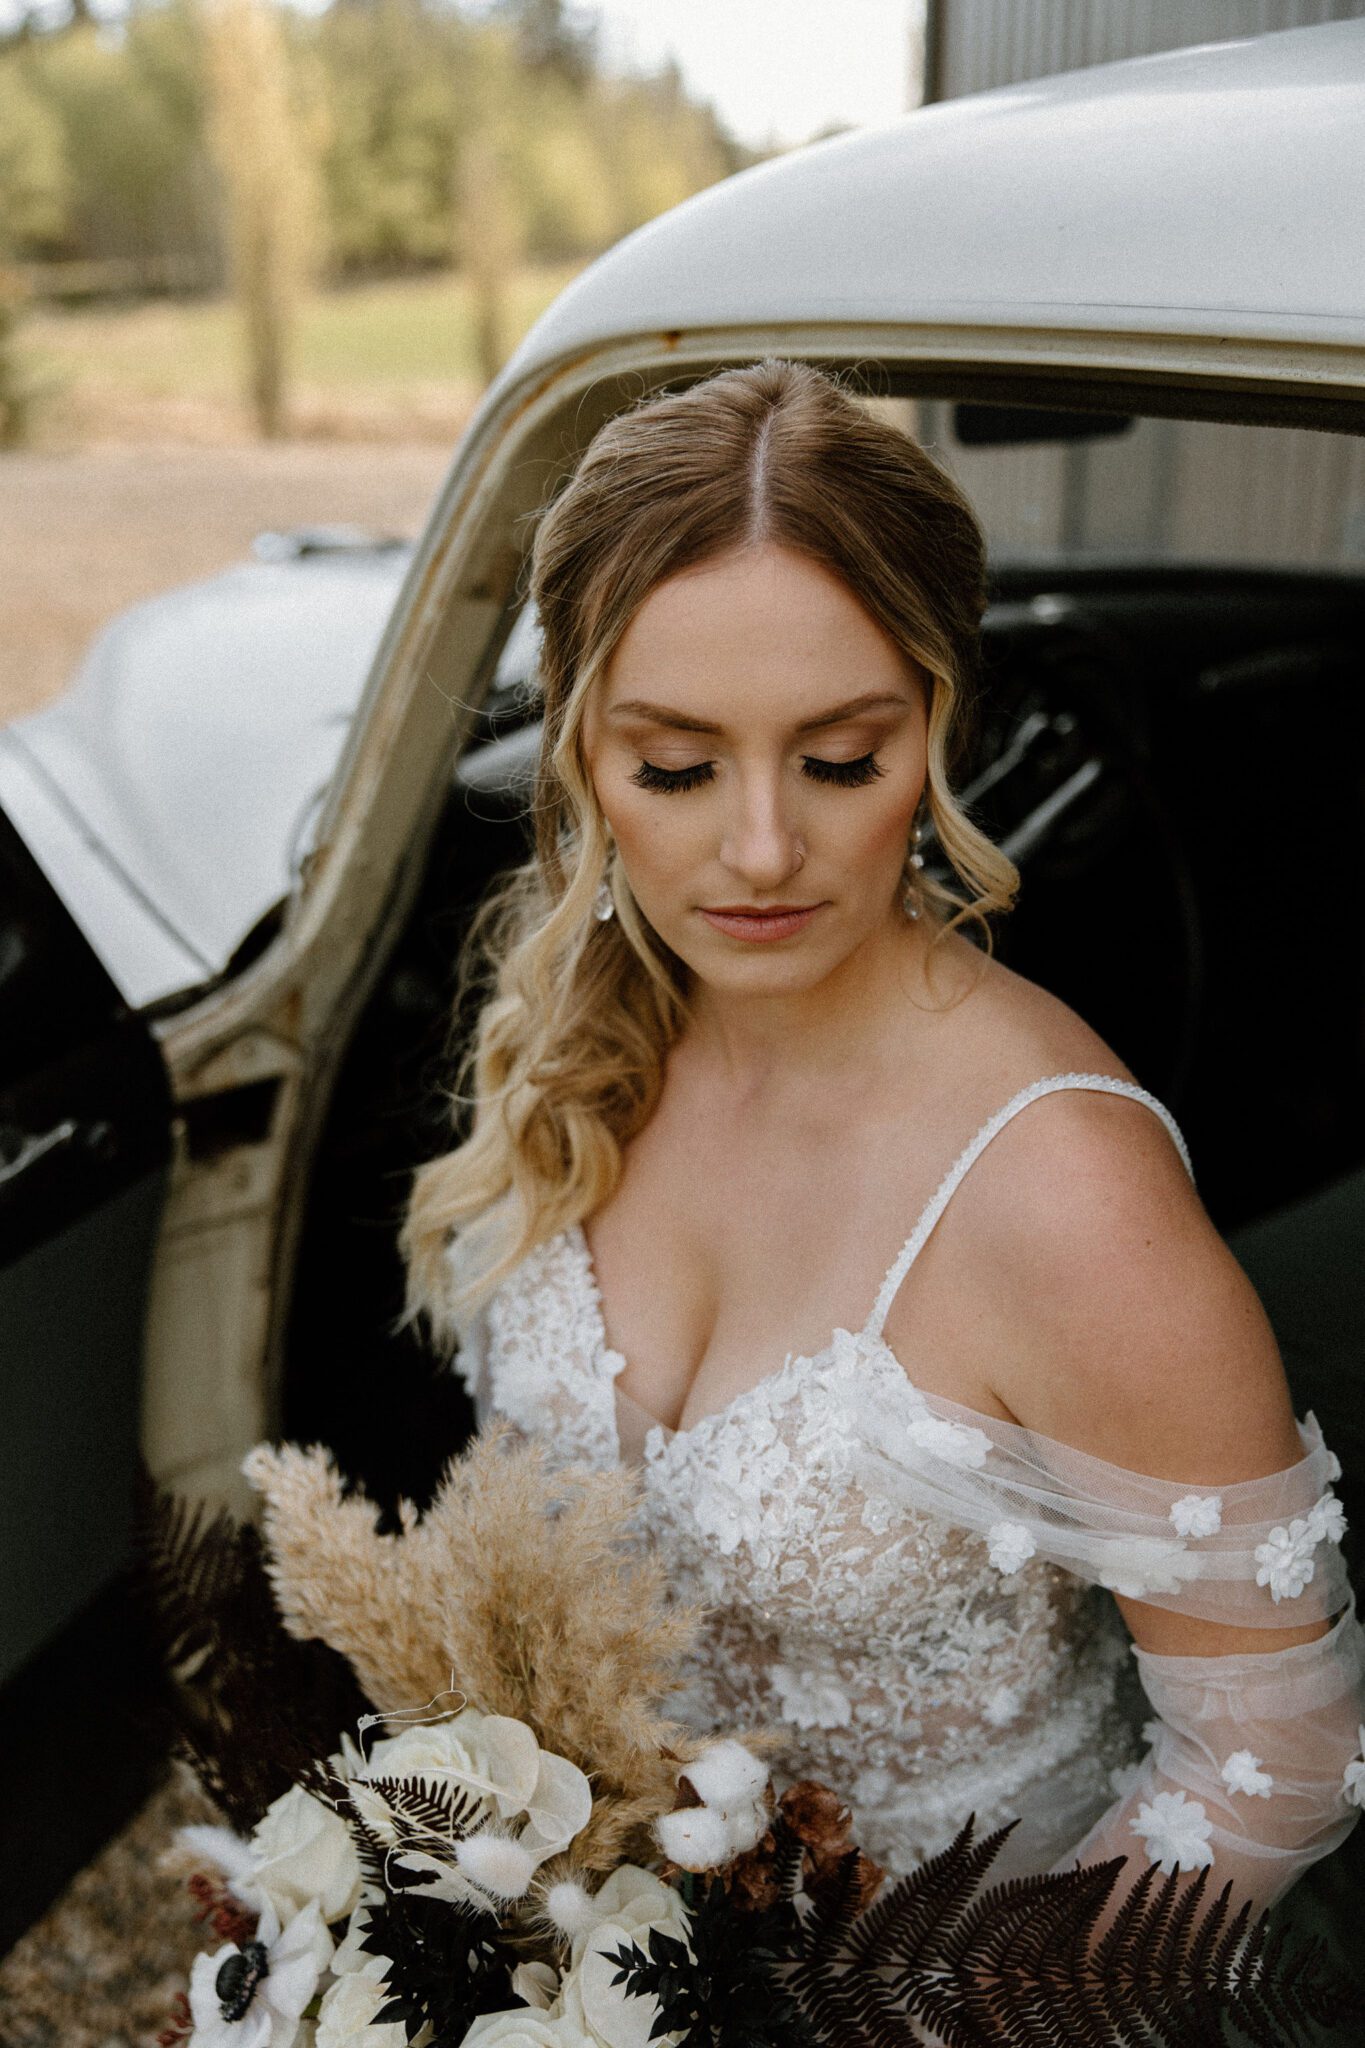 Portrait of bride sitting in the vintage getaway car at 52 North Venue, holding the bridal bouquet with rich textures and tones, wearing a floral detailed bridal gown with her hair in an elegant ponytail updo. 